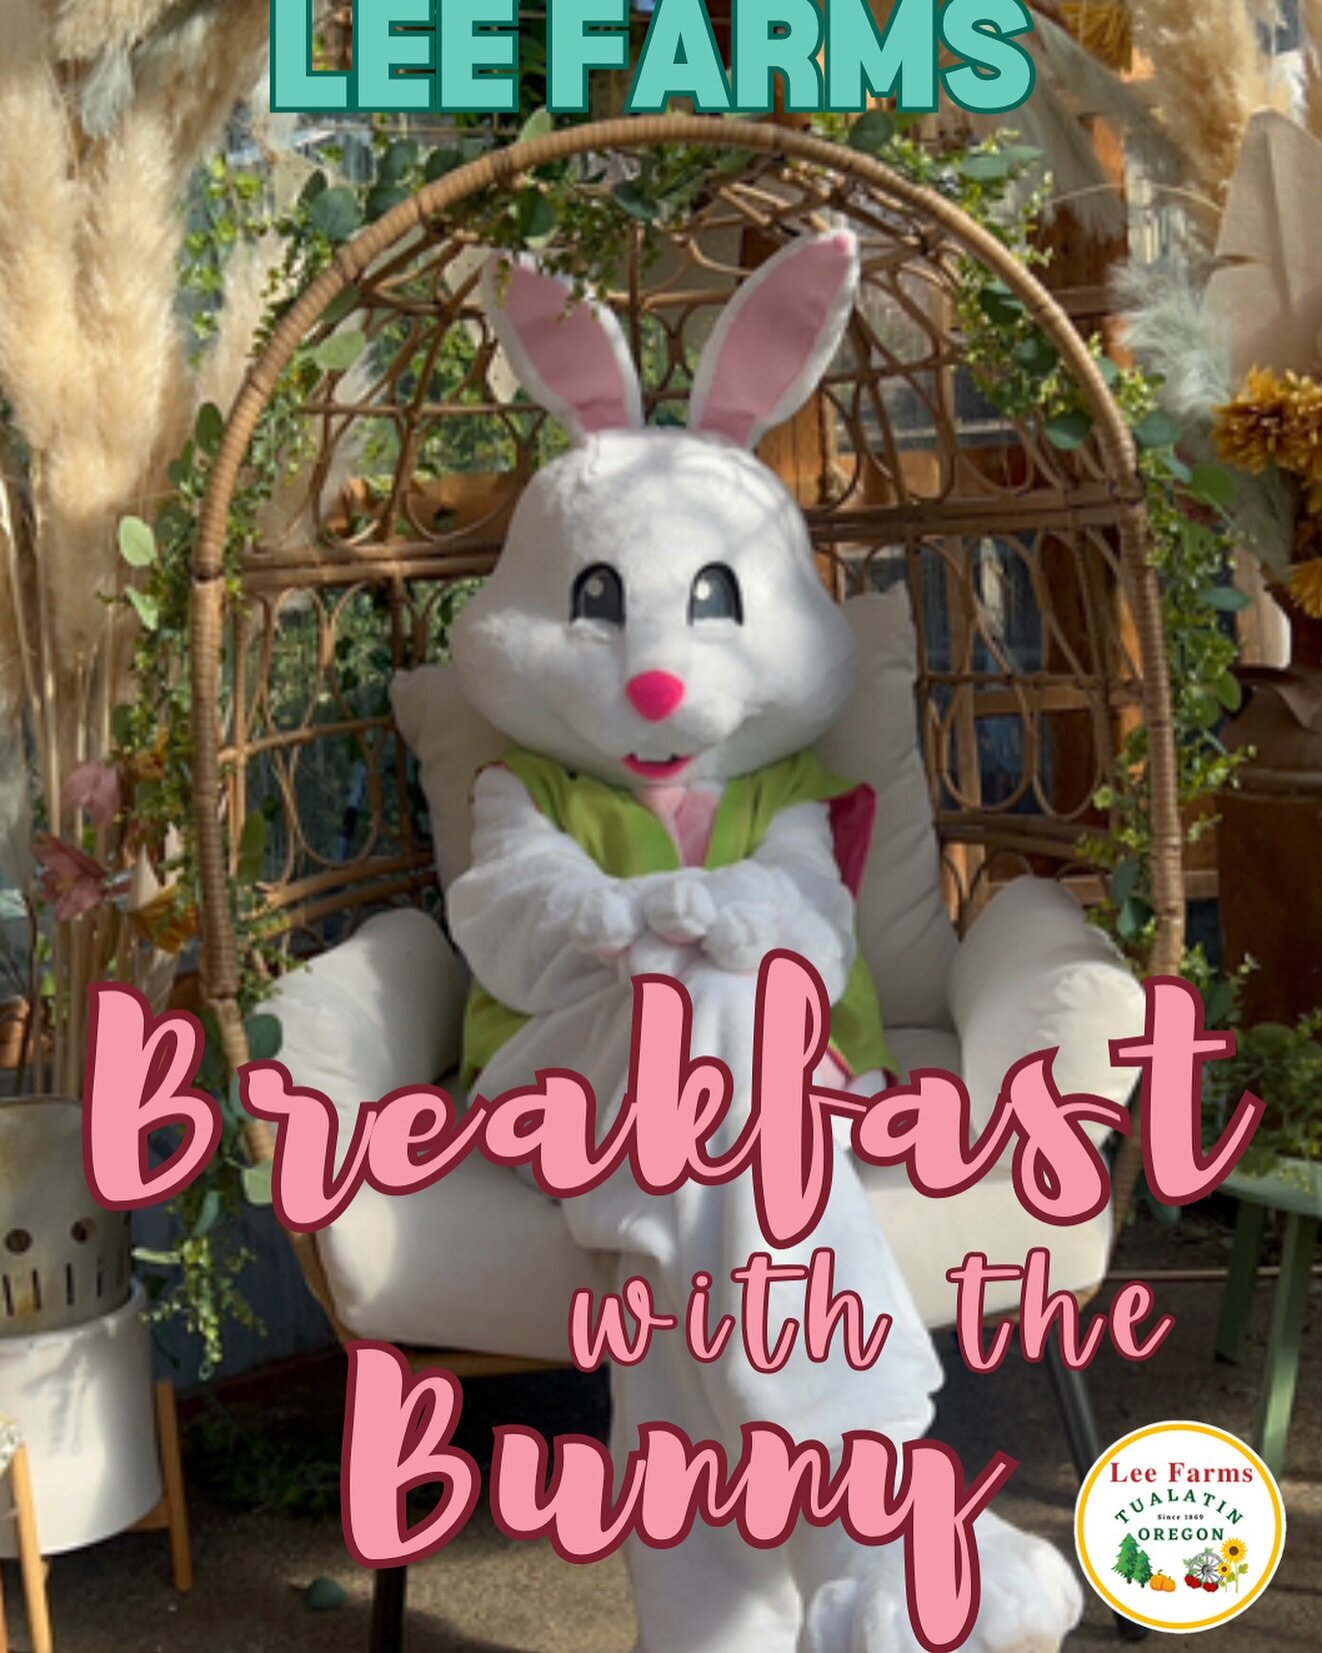 🐰Breakfast with the Bunny 
📍Lee Farms, Tualatin, Oregon
💐Includes:
 meet and greet with the bunny
Breakfast Buffet 
Unlimited mimosa flights and espresso bar 
Easter egg hunt where you get to pick your own pieces!
Farm activities: family hayrides,